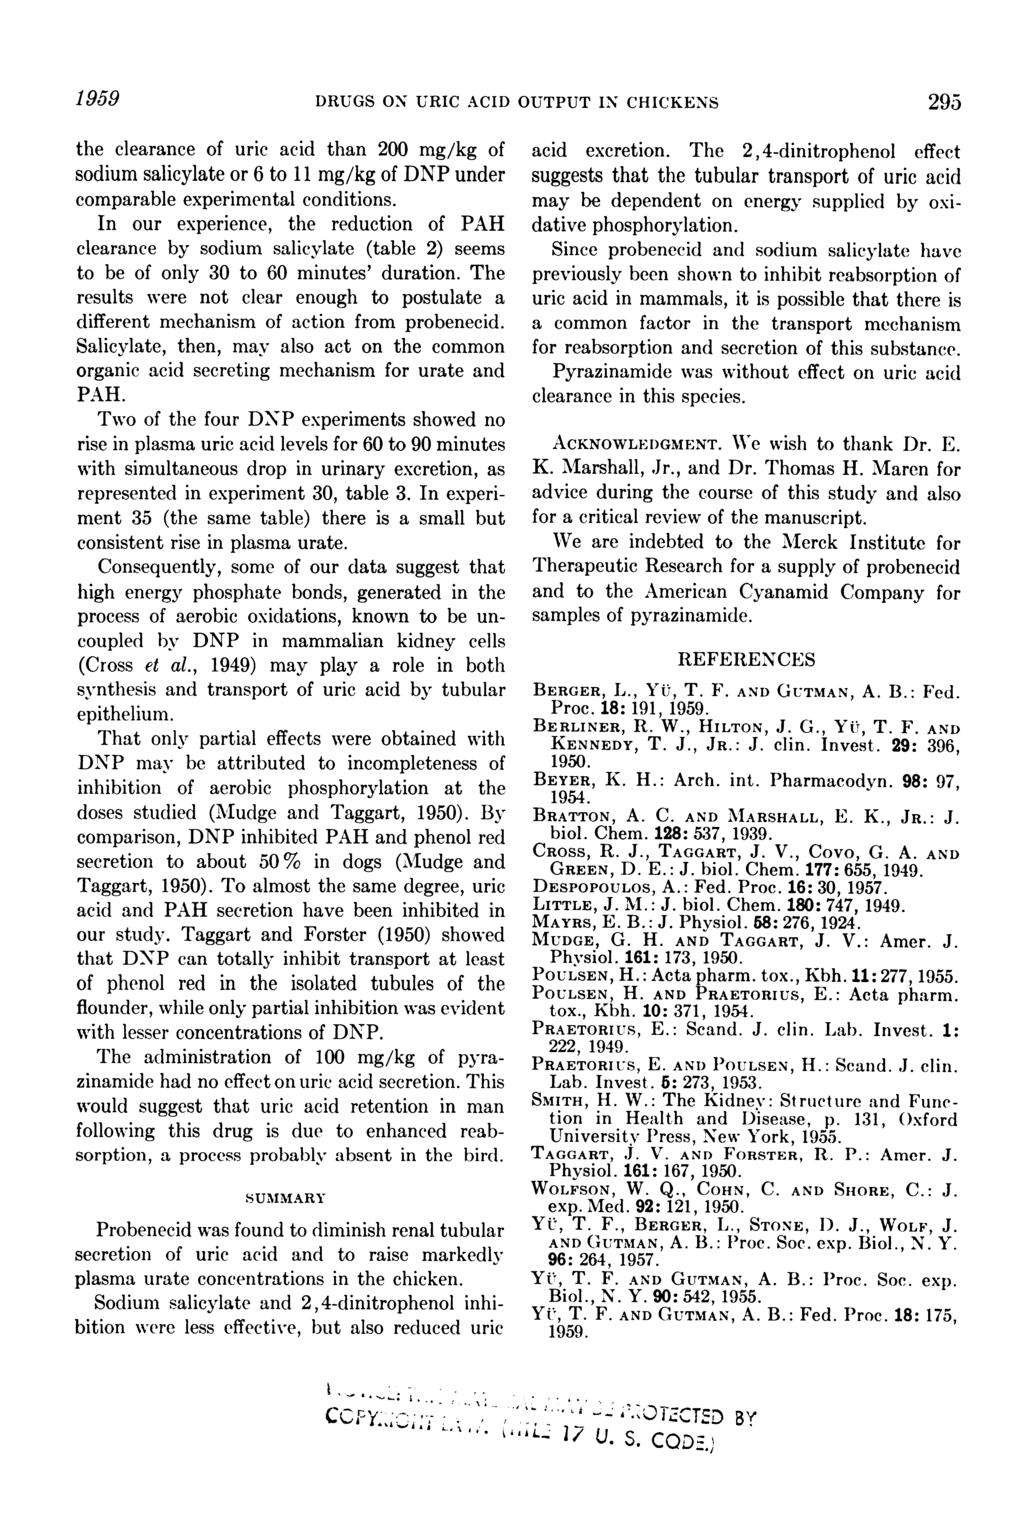 1959 DRUGS ON URIC ACID OUTPUT IN CHICKENS 295 the clearance of uric acid than 200 mg/kg of sodium salicylate or 6 to 11 mg/kg of DNP under comparable experimental conditions.